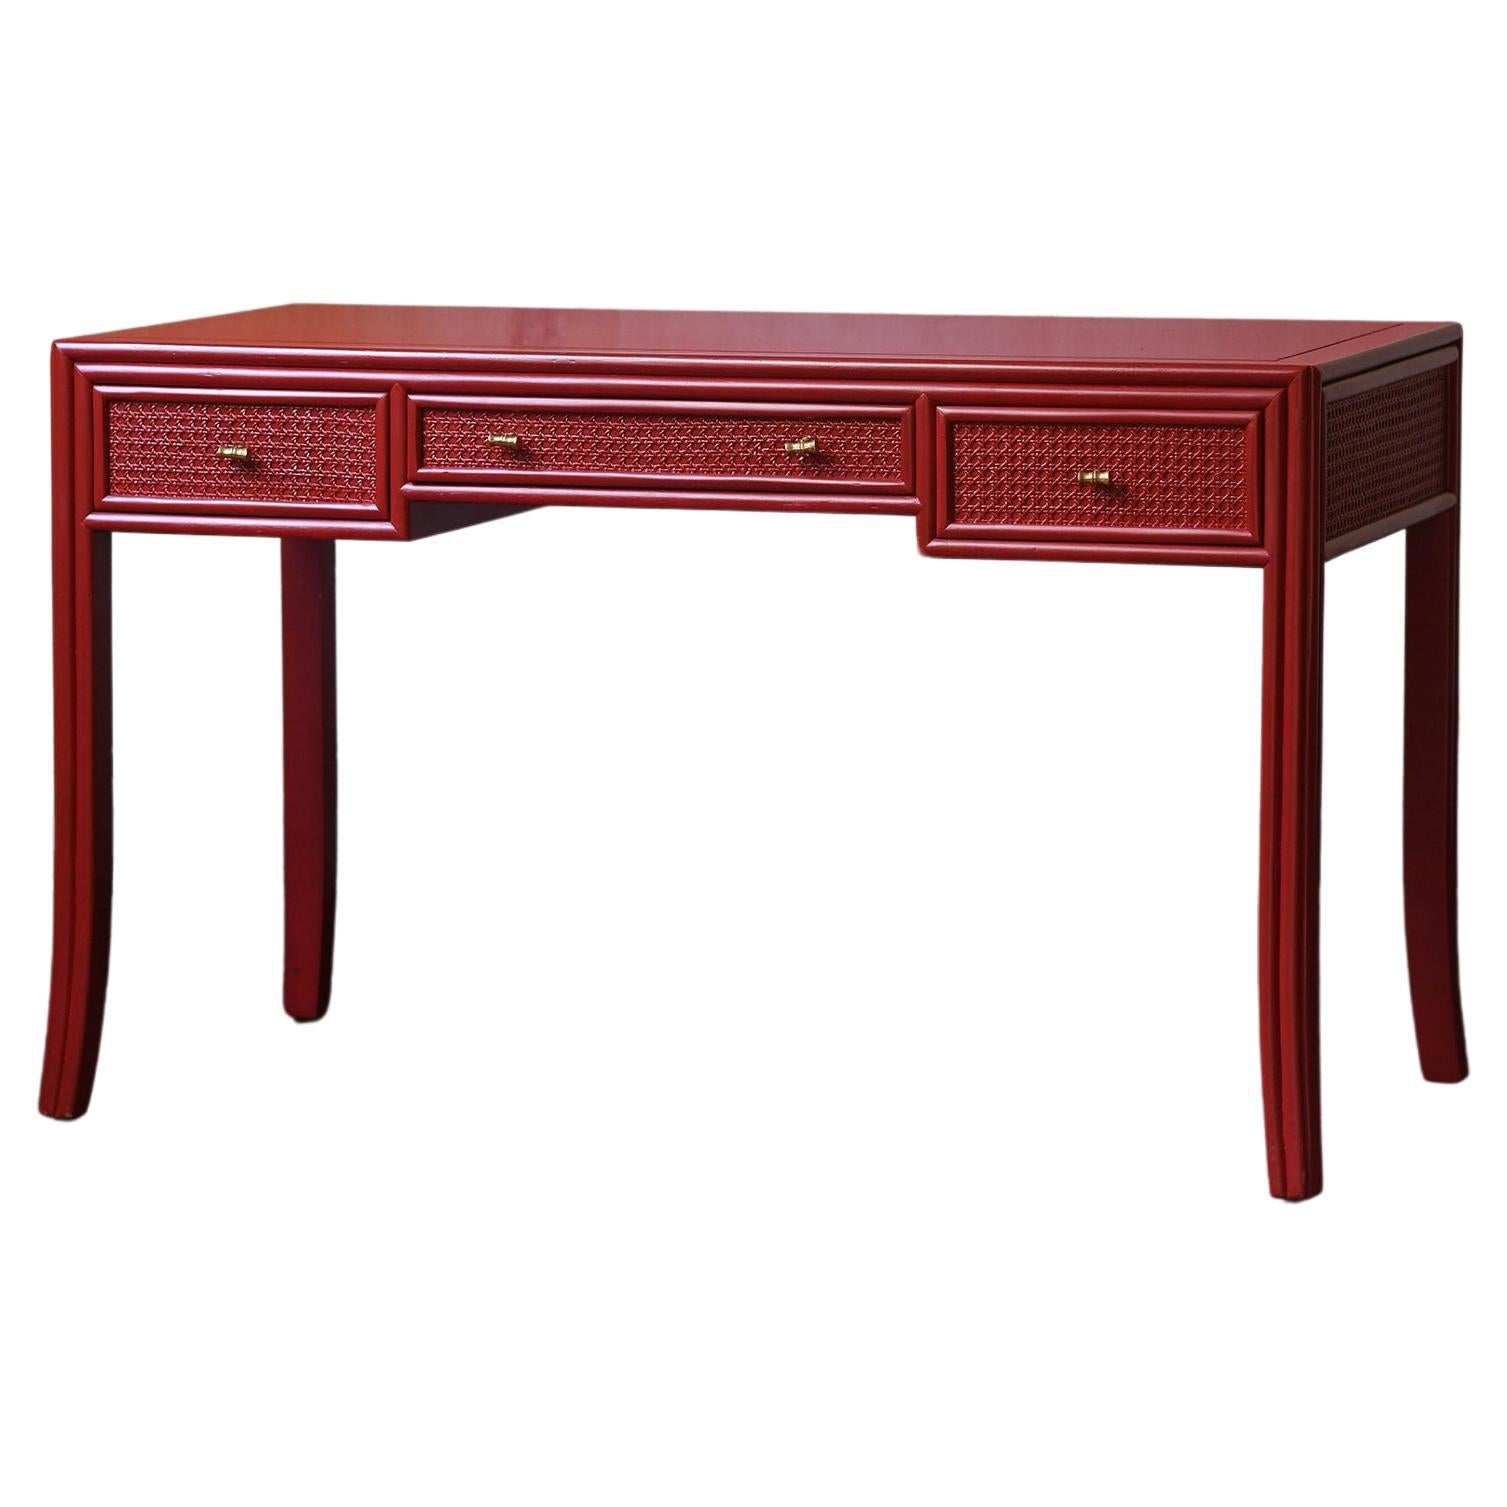 China red lacquered desk, Elinor and John McGuire for Lyda Levi